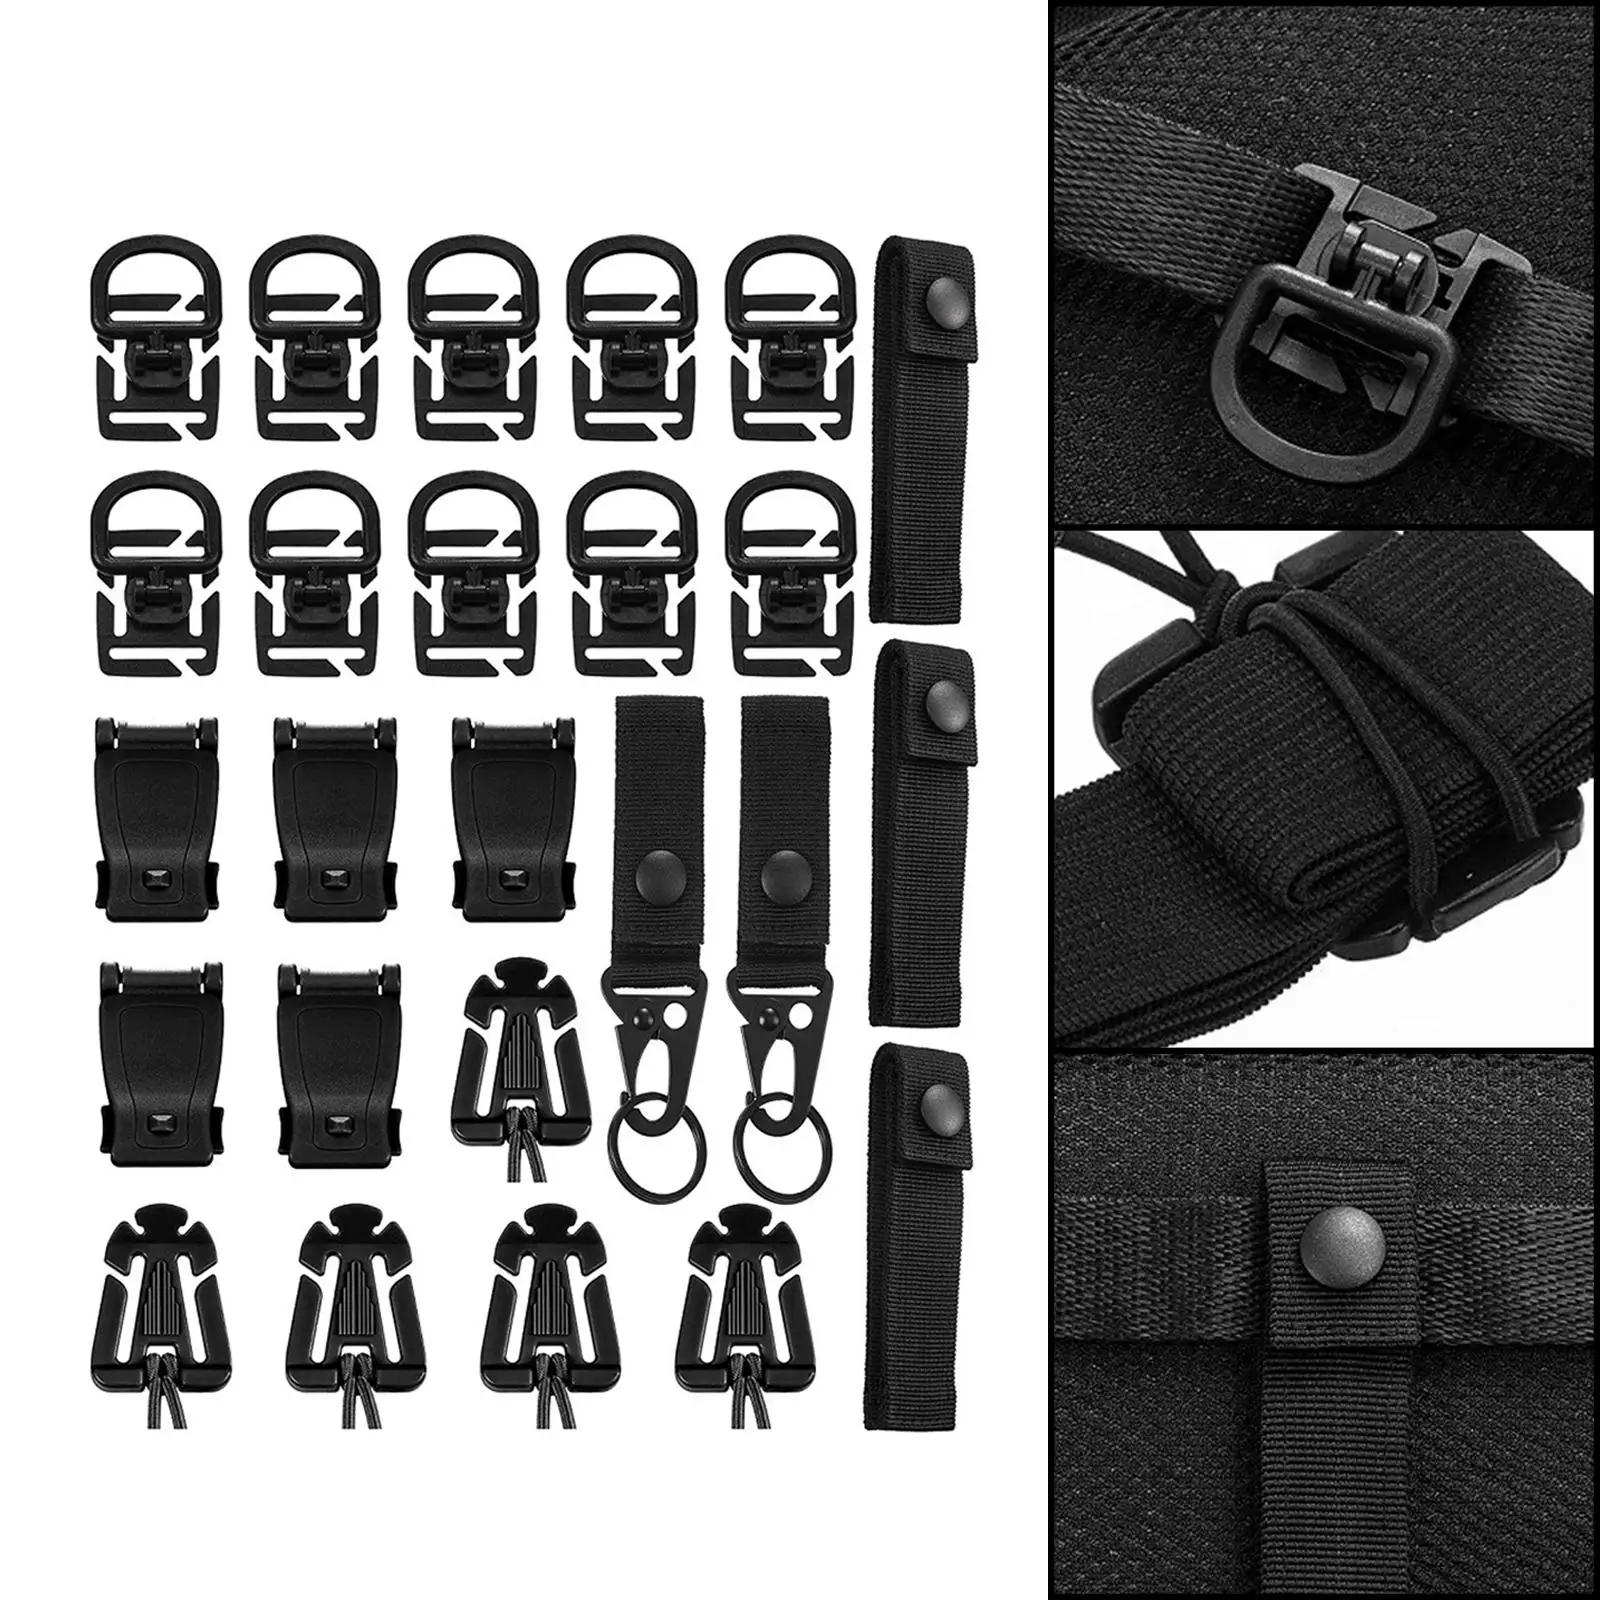 25Pcs Attachments for Tactical Molle Backpack Webbing Key Rings D-Ring Clips